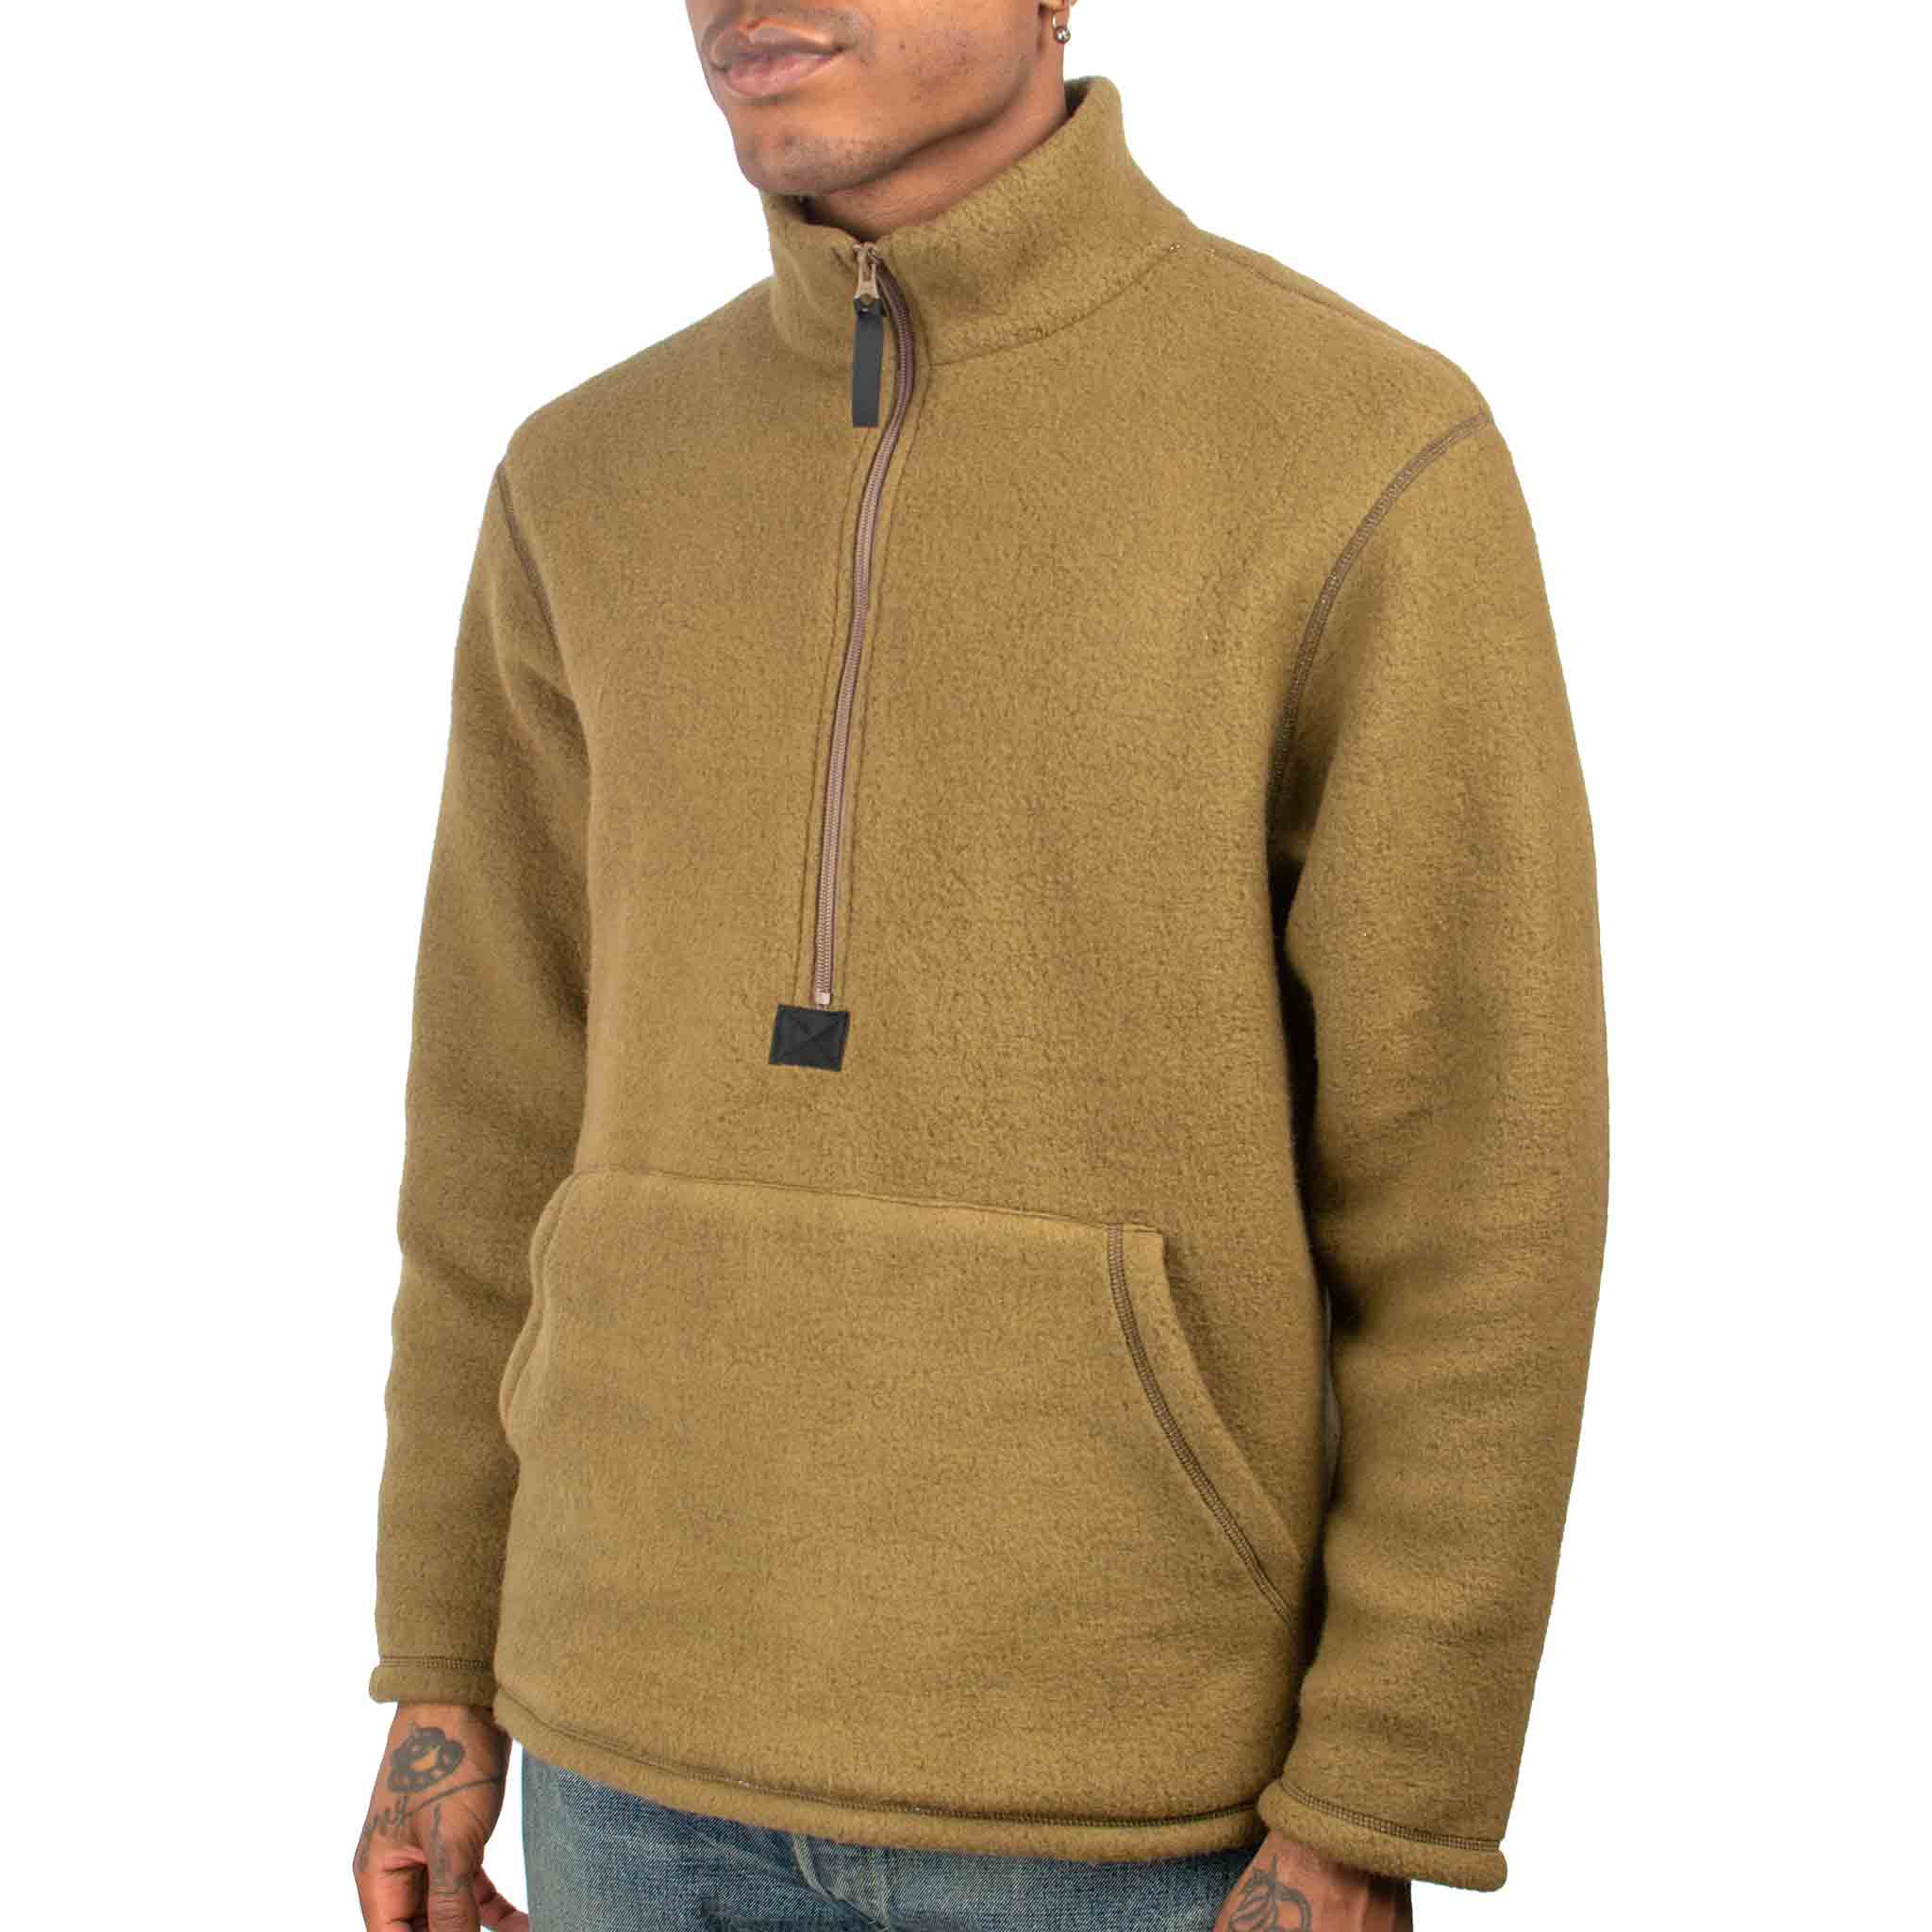 The Real McCoy's MC21101 Shirts, Pullover, Fleece Coyote Close